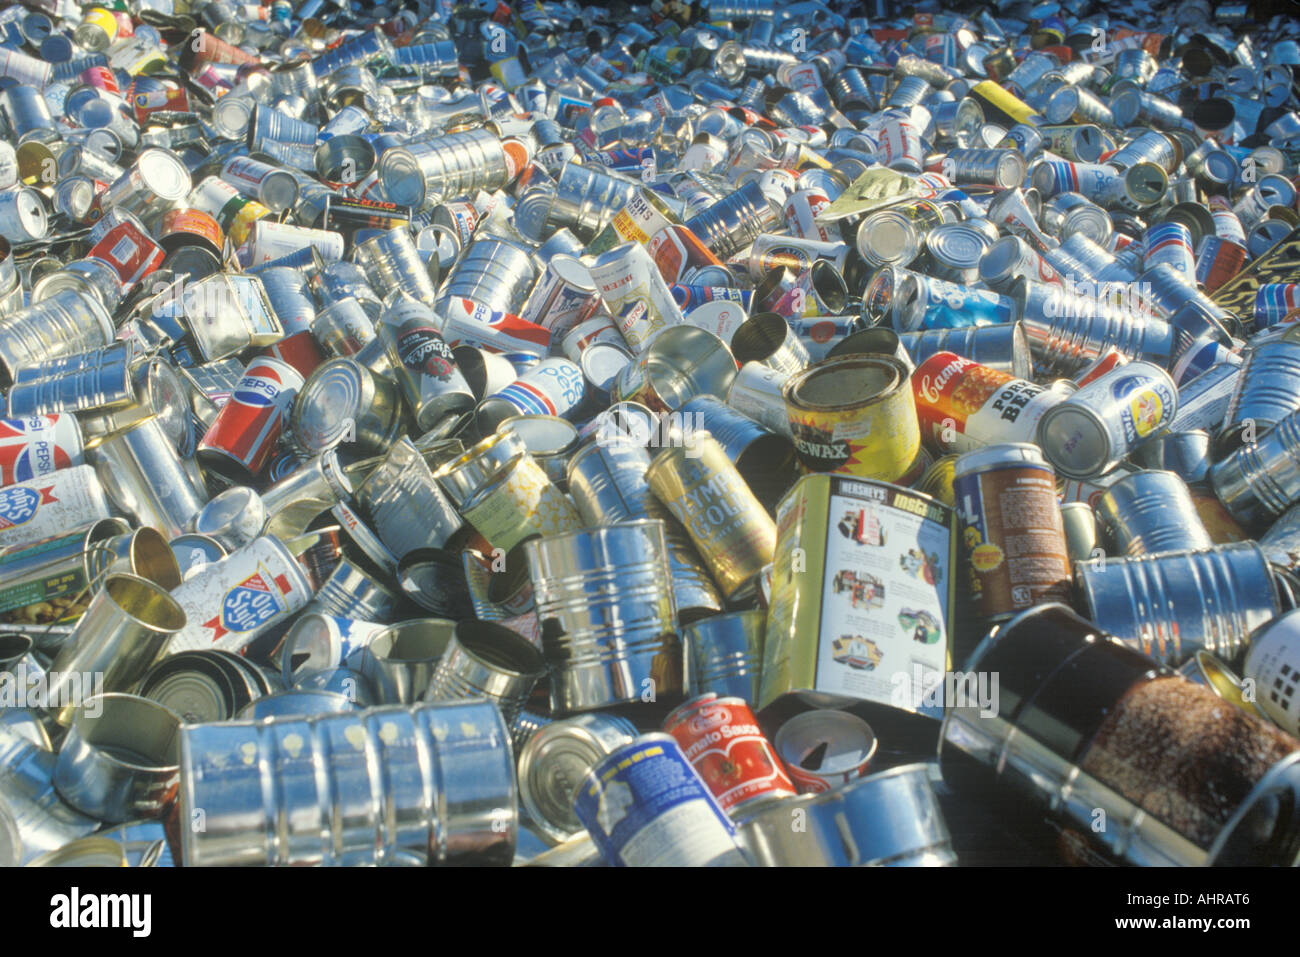 https://c8.alamy.com/comp/AHRAT6/an-assortment-of-empty-aluminum-cans-waiting-for-recycling-in-st-louis-AHRAT6.jpg